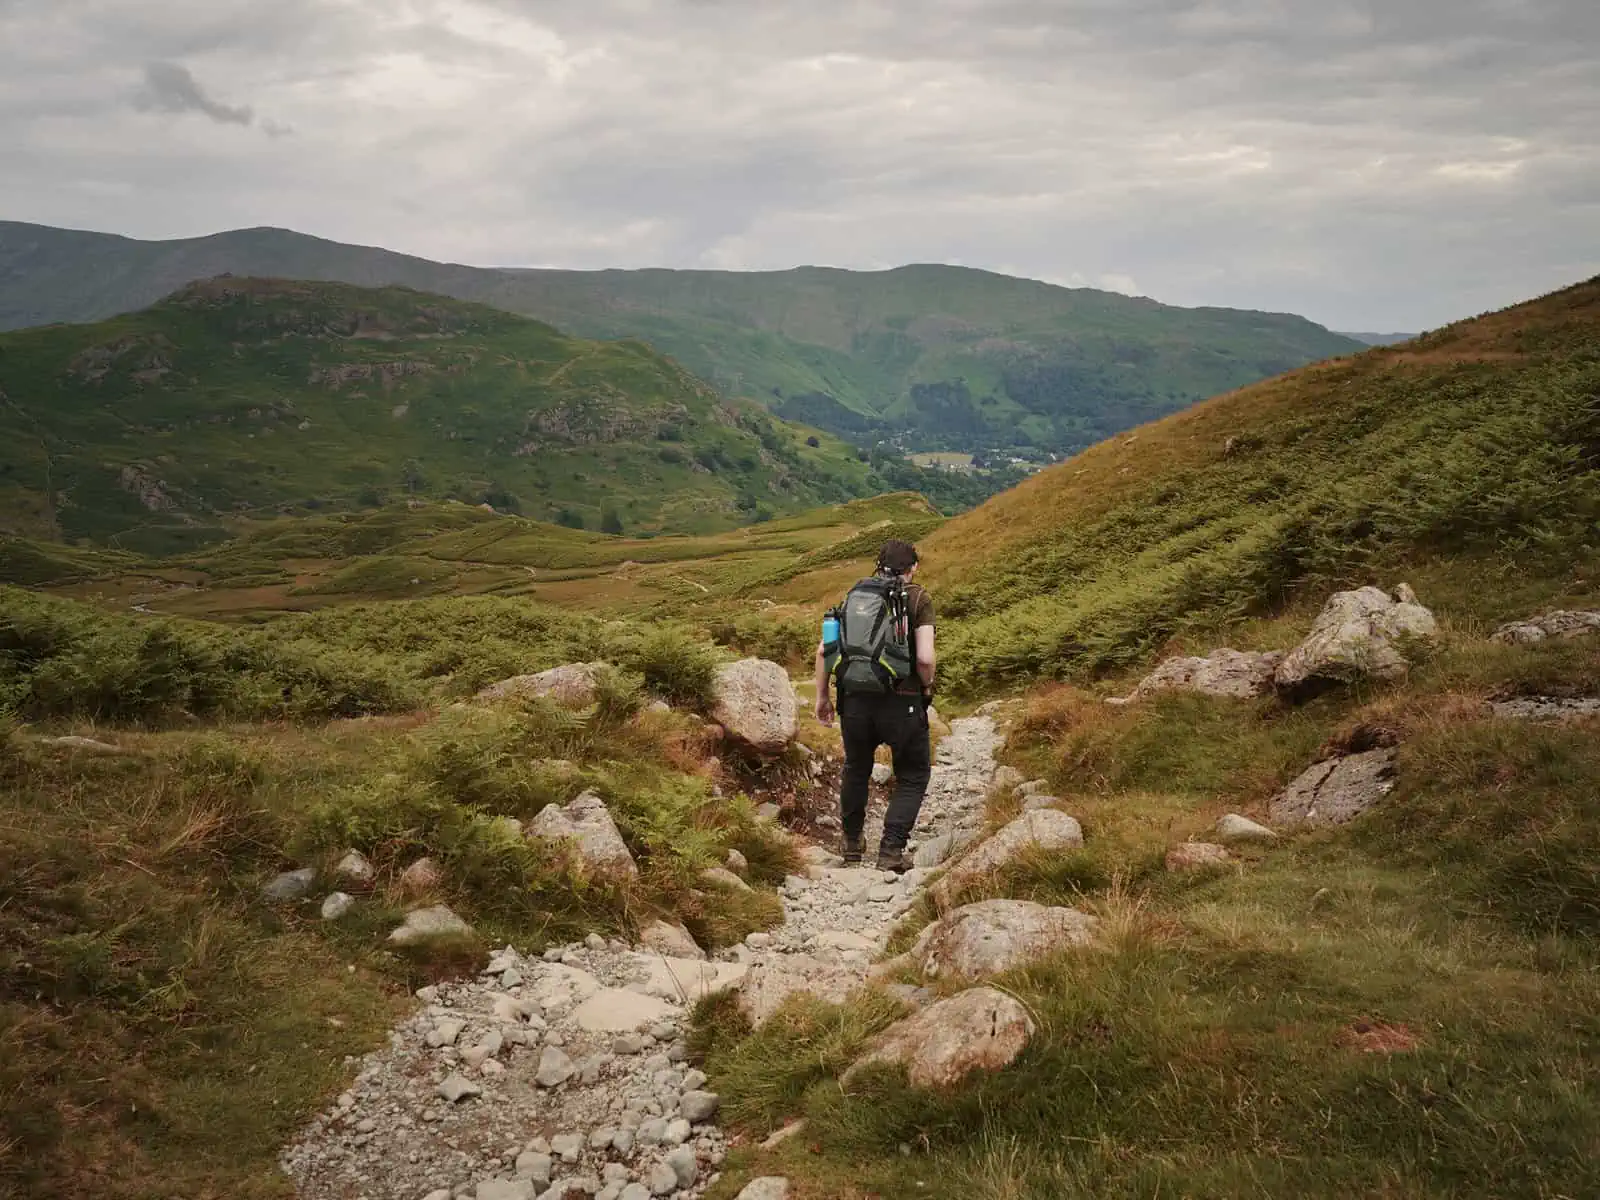 ID: A landscape image. Matt is hiking down a narrow path on a mountain and is centre frame. He is wearing grey trousers, purple top and a grey and green backpack. He is pictured from behind. In the background are more soft mountains with greens and browns from vegetation. The sky is a little overcast.